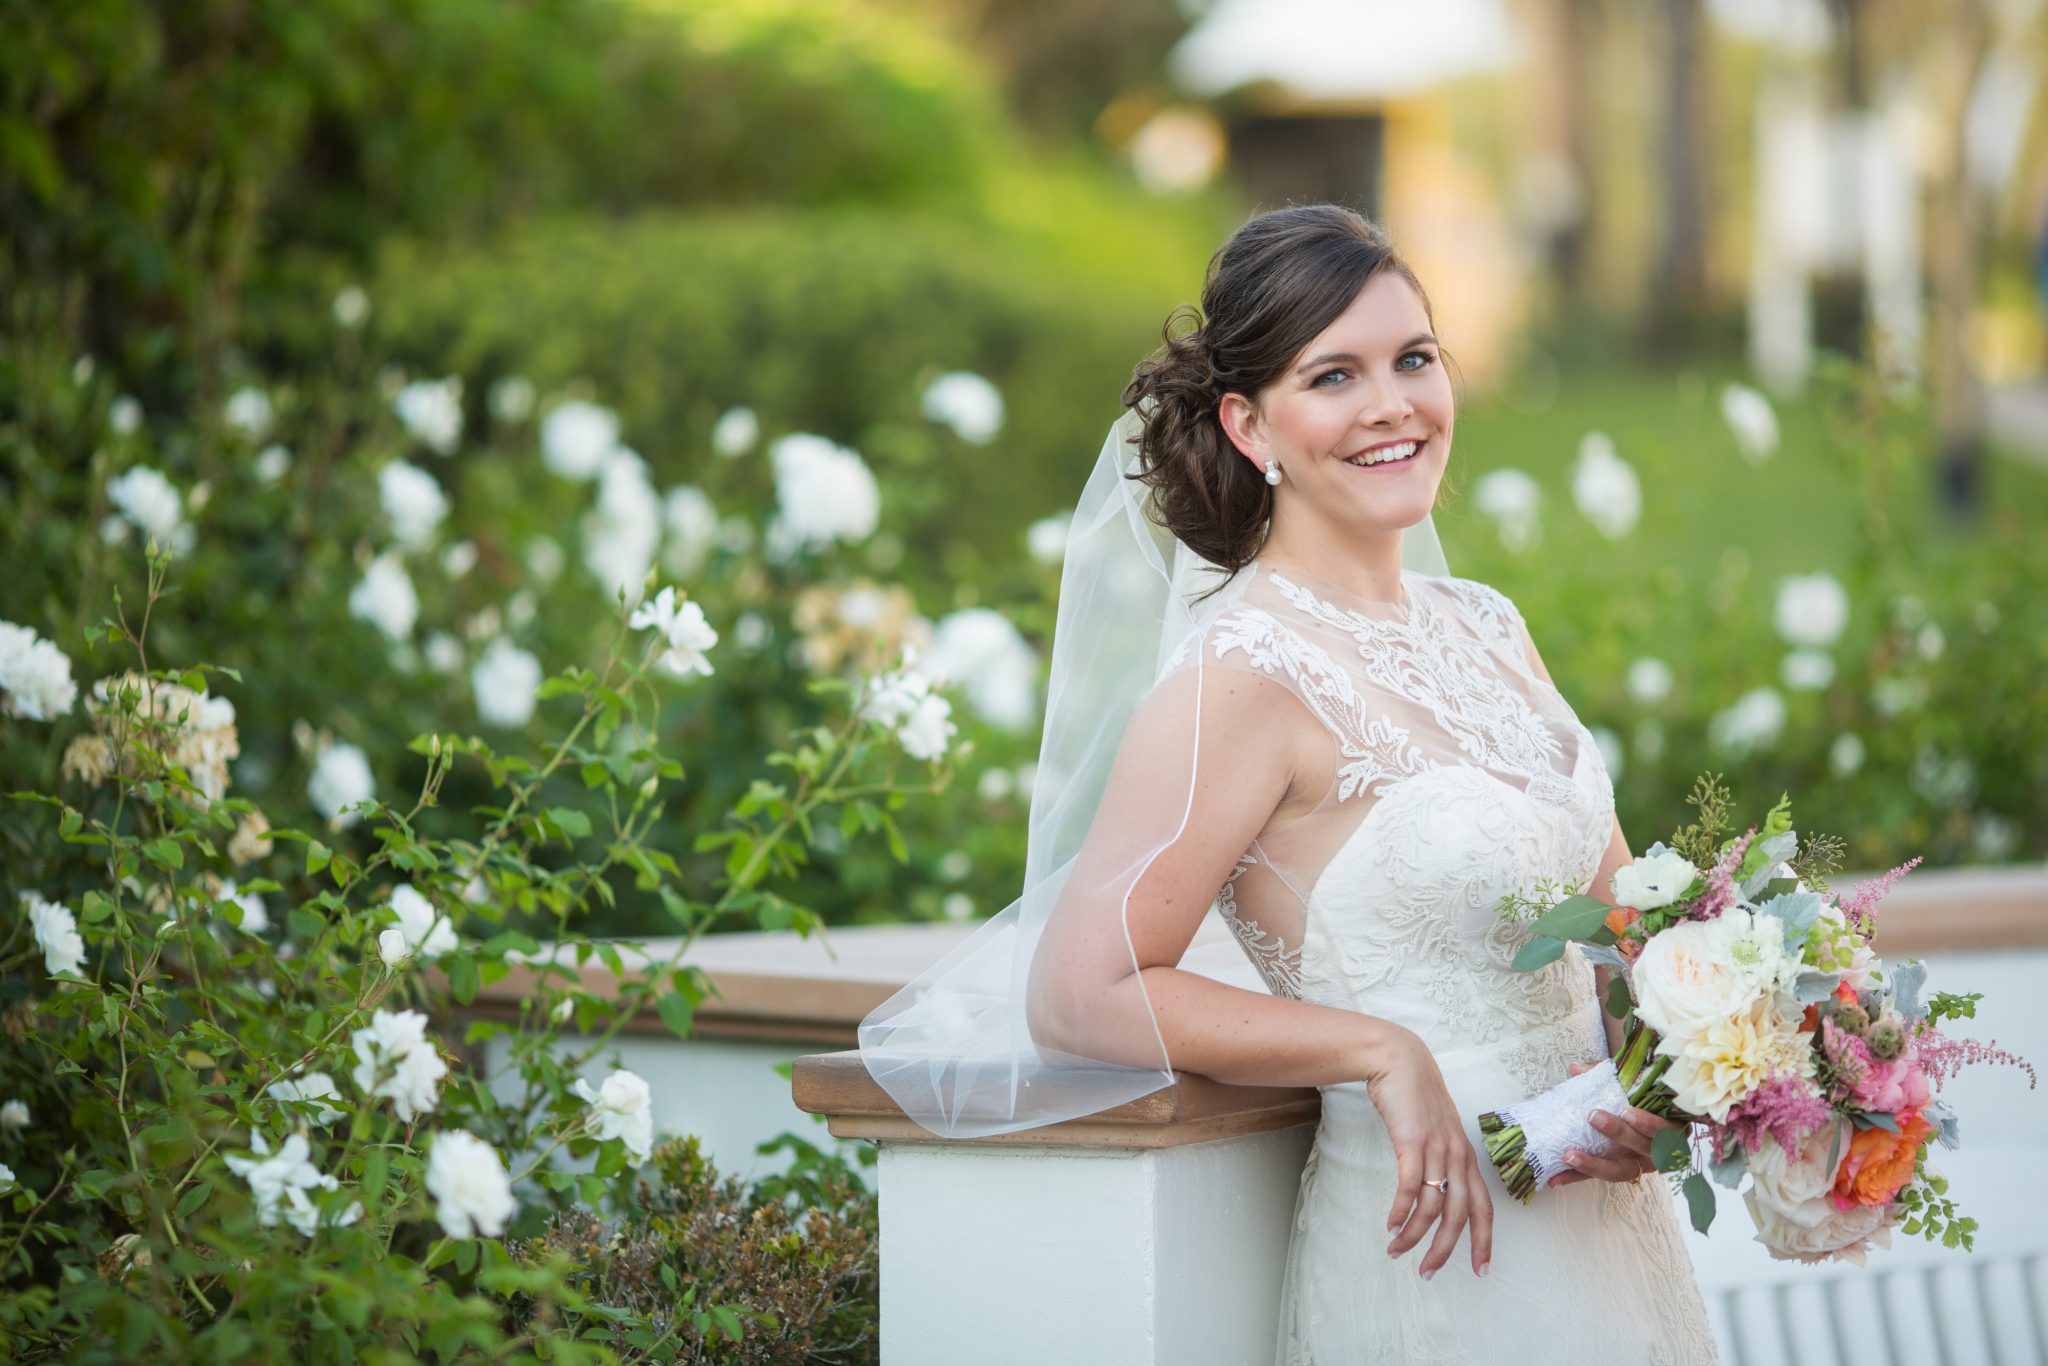 Beautiful bride posing in a white gown and floral bouquet